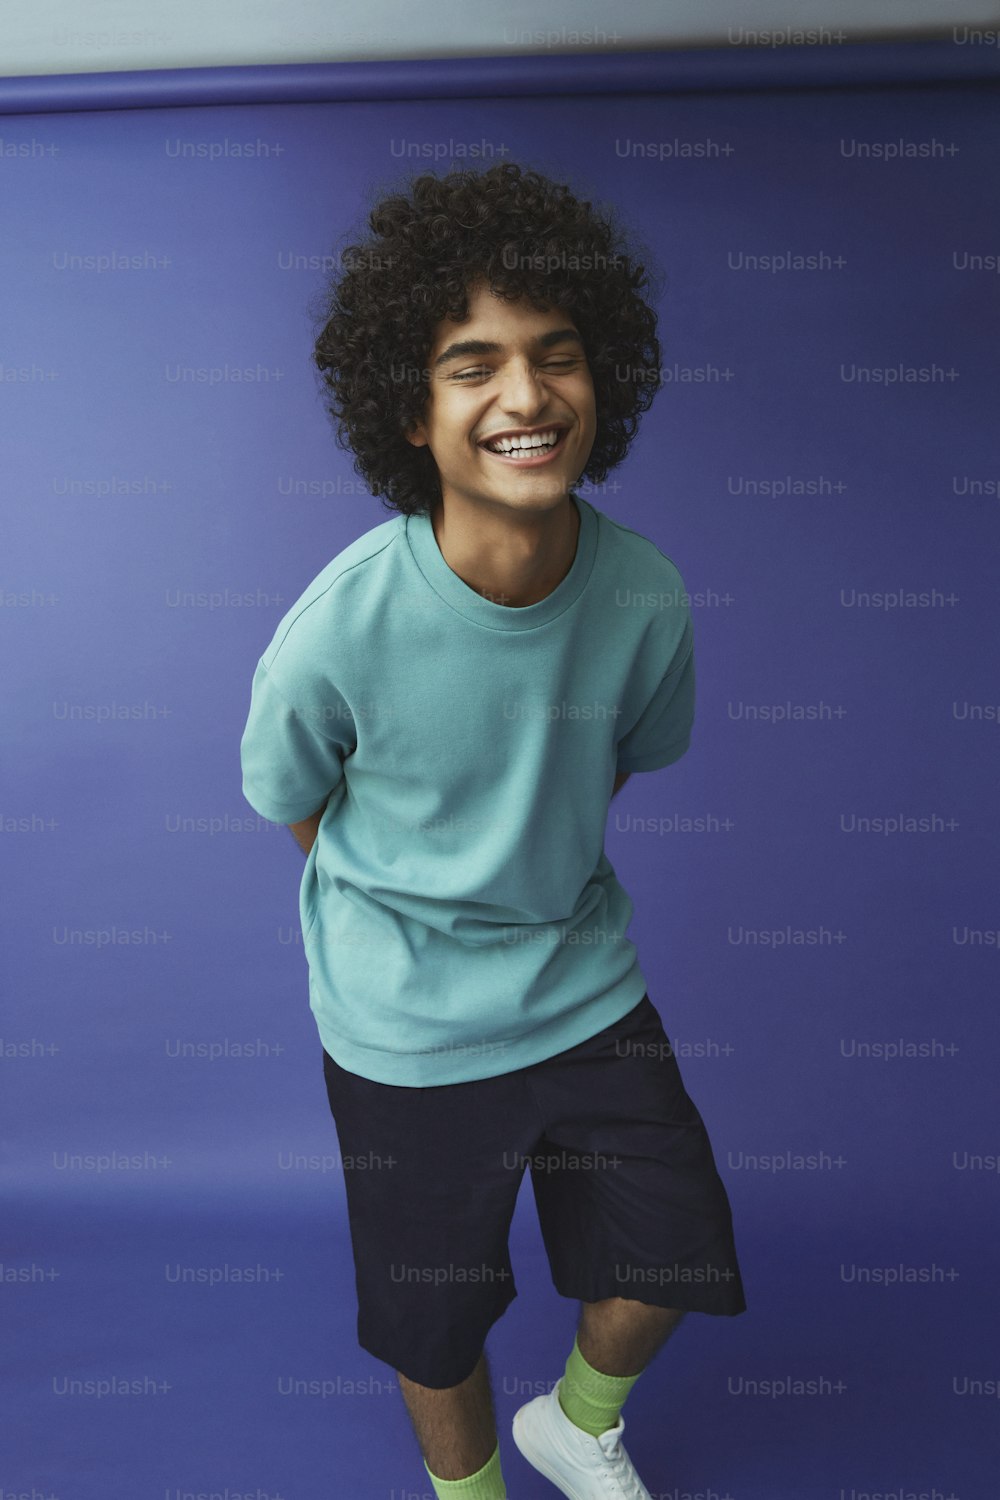 a young man with curly hair wearing a blue shirt and black shorts